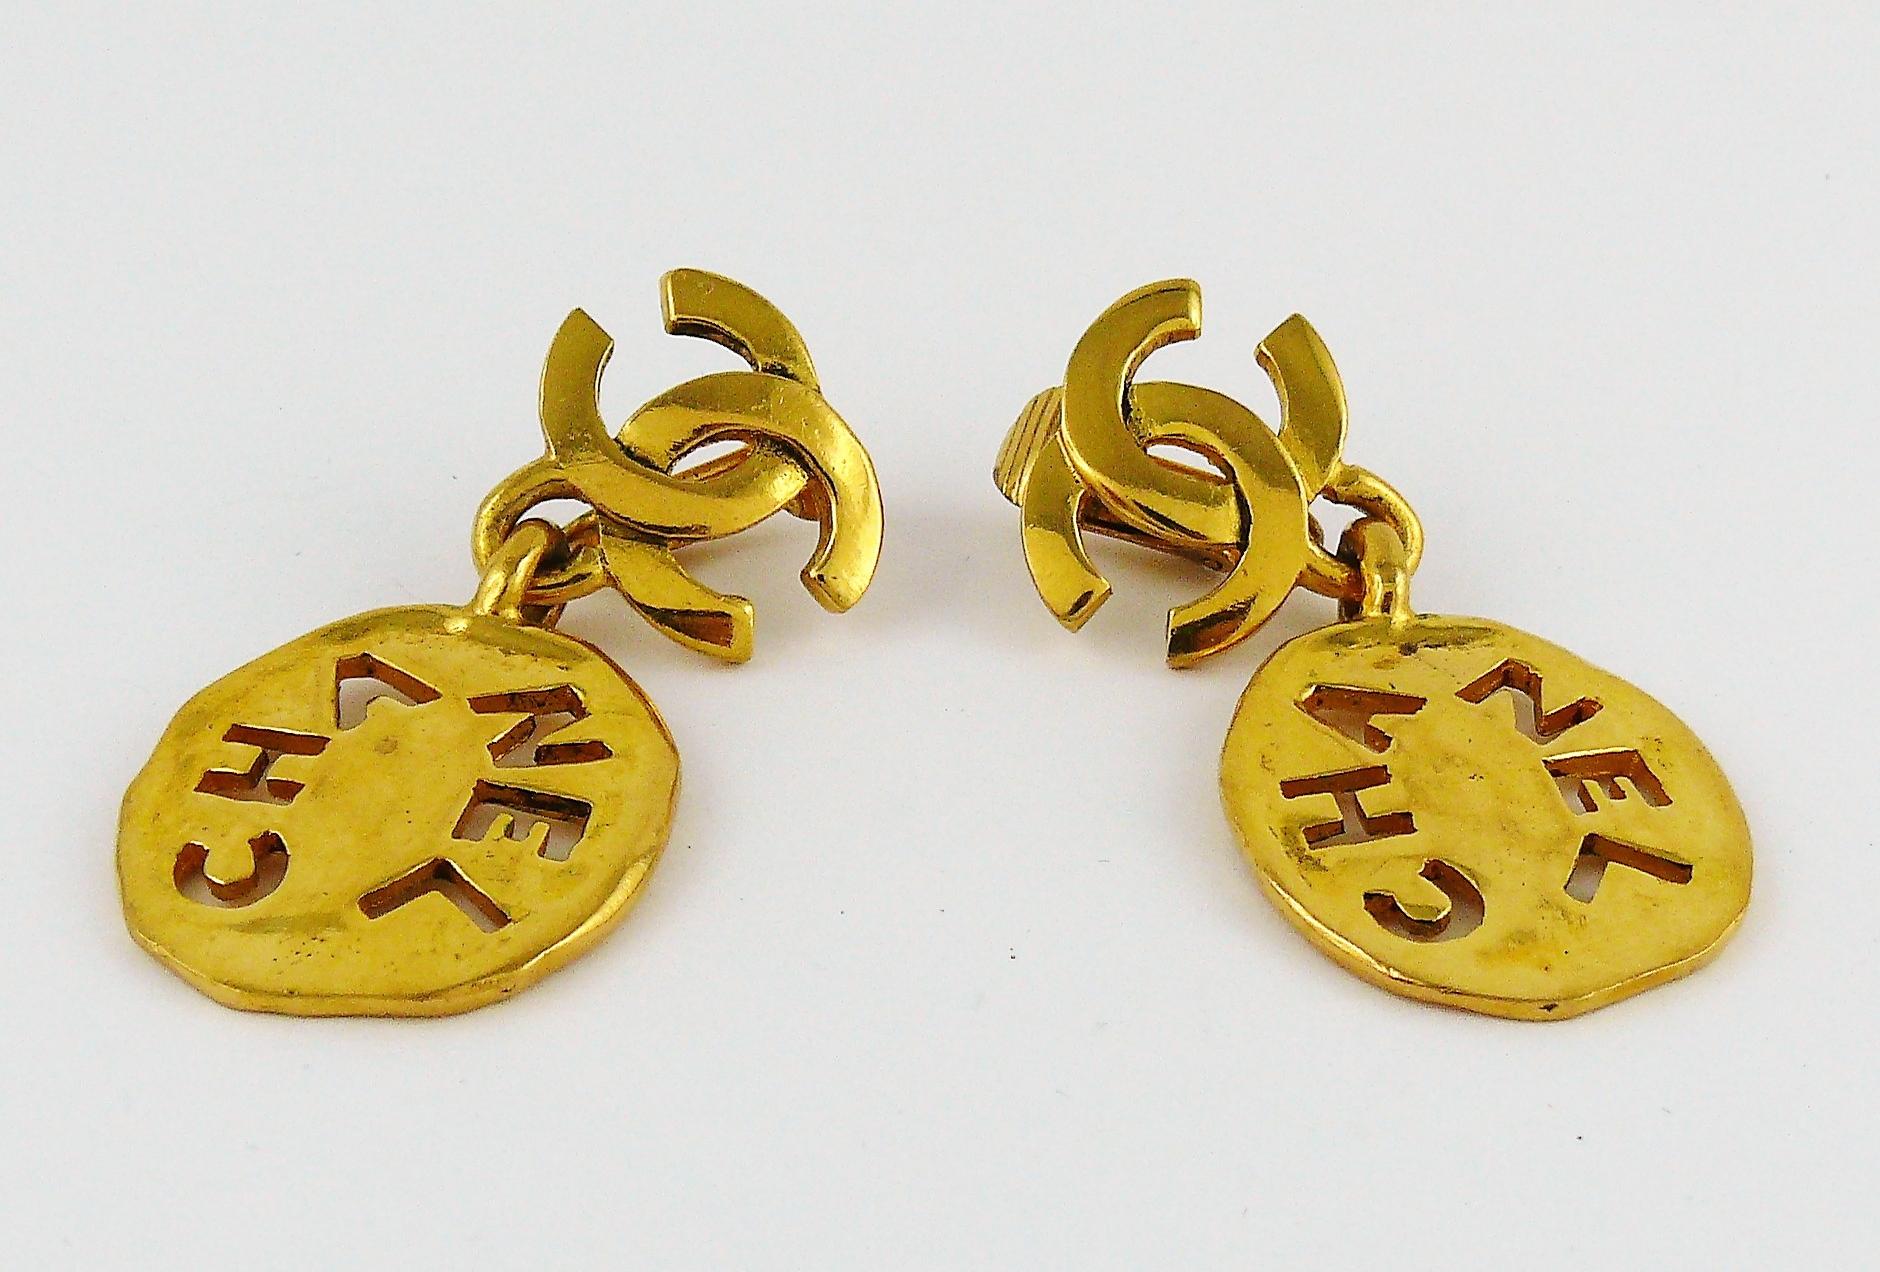 CHANEL vintage gold toned dangling earrings (clip-on) featuring a CC logo top and a cut-out CHANEL irregular coin drop.

Embossed CHANEL.

Indicative measurements : height approx. 4.8 cm (1.89 inches) / max width approx. 2.4 cm (0.94 inch).

JEWELRY